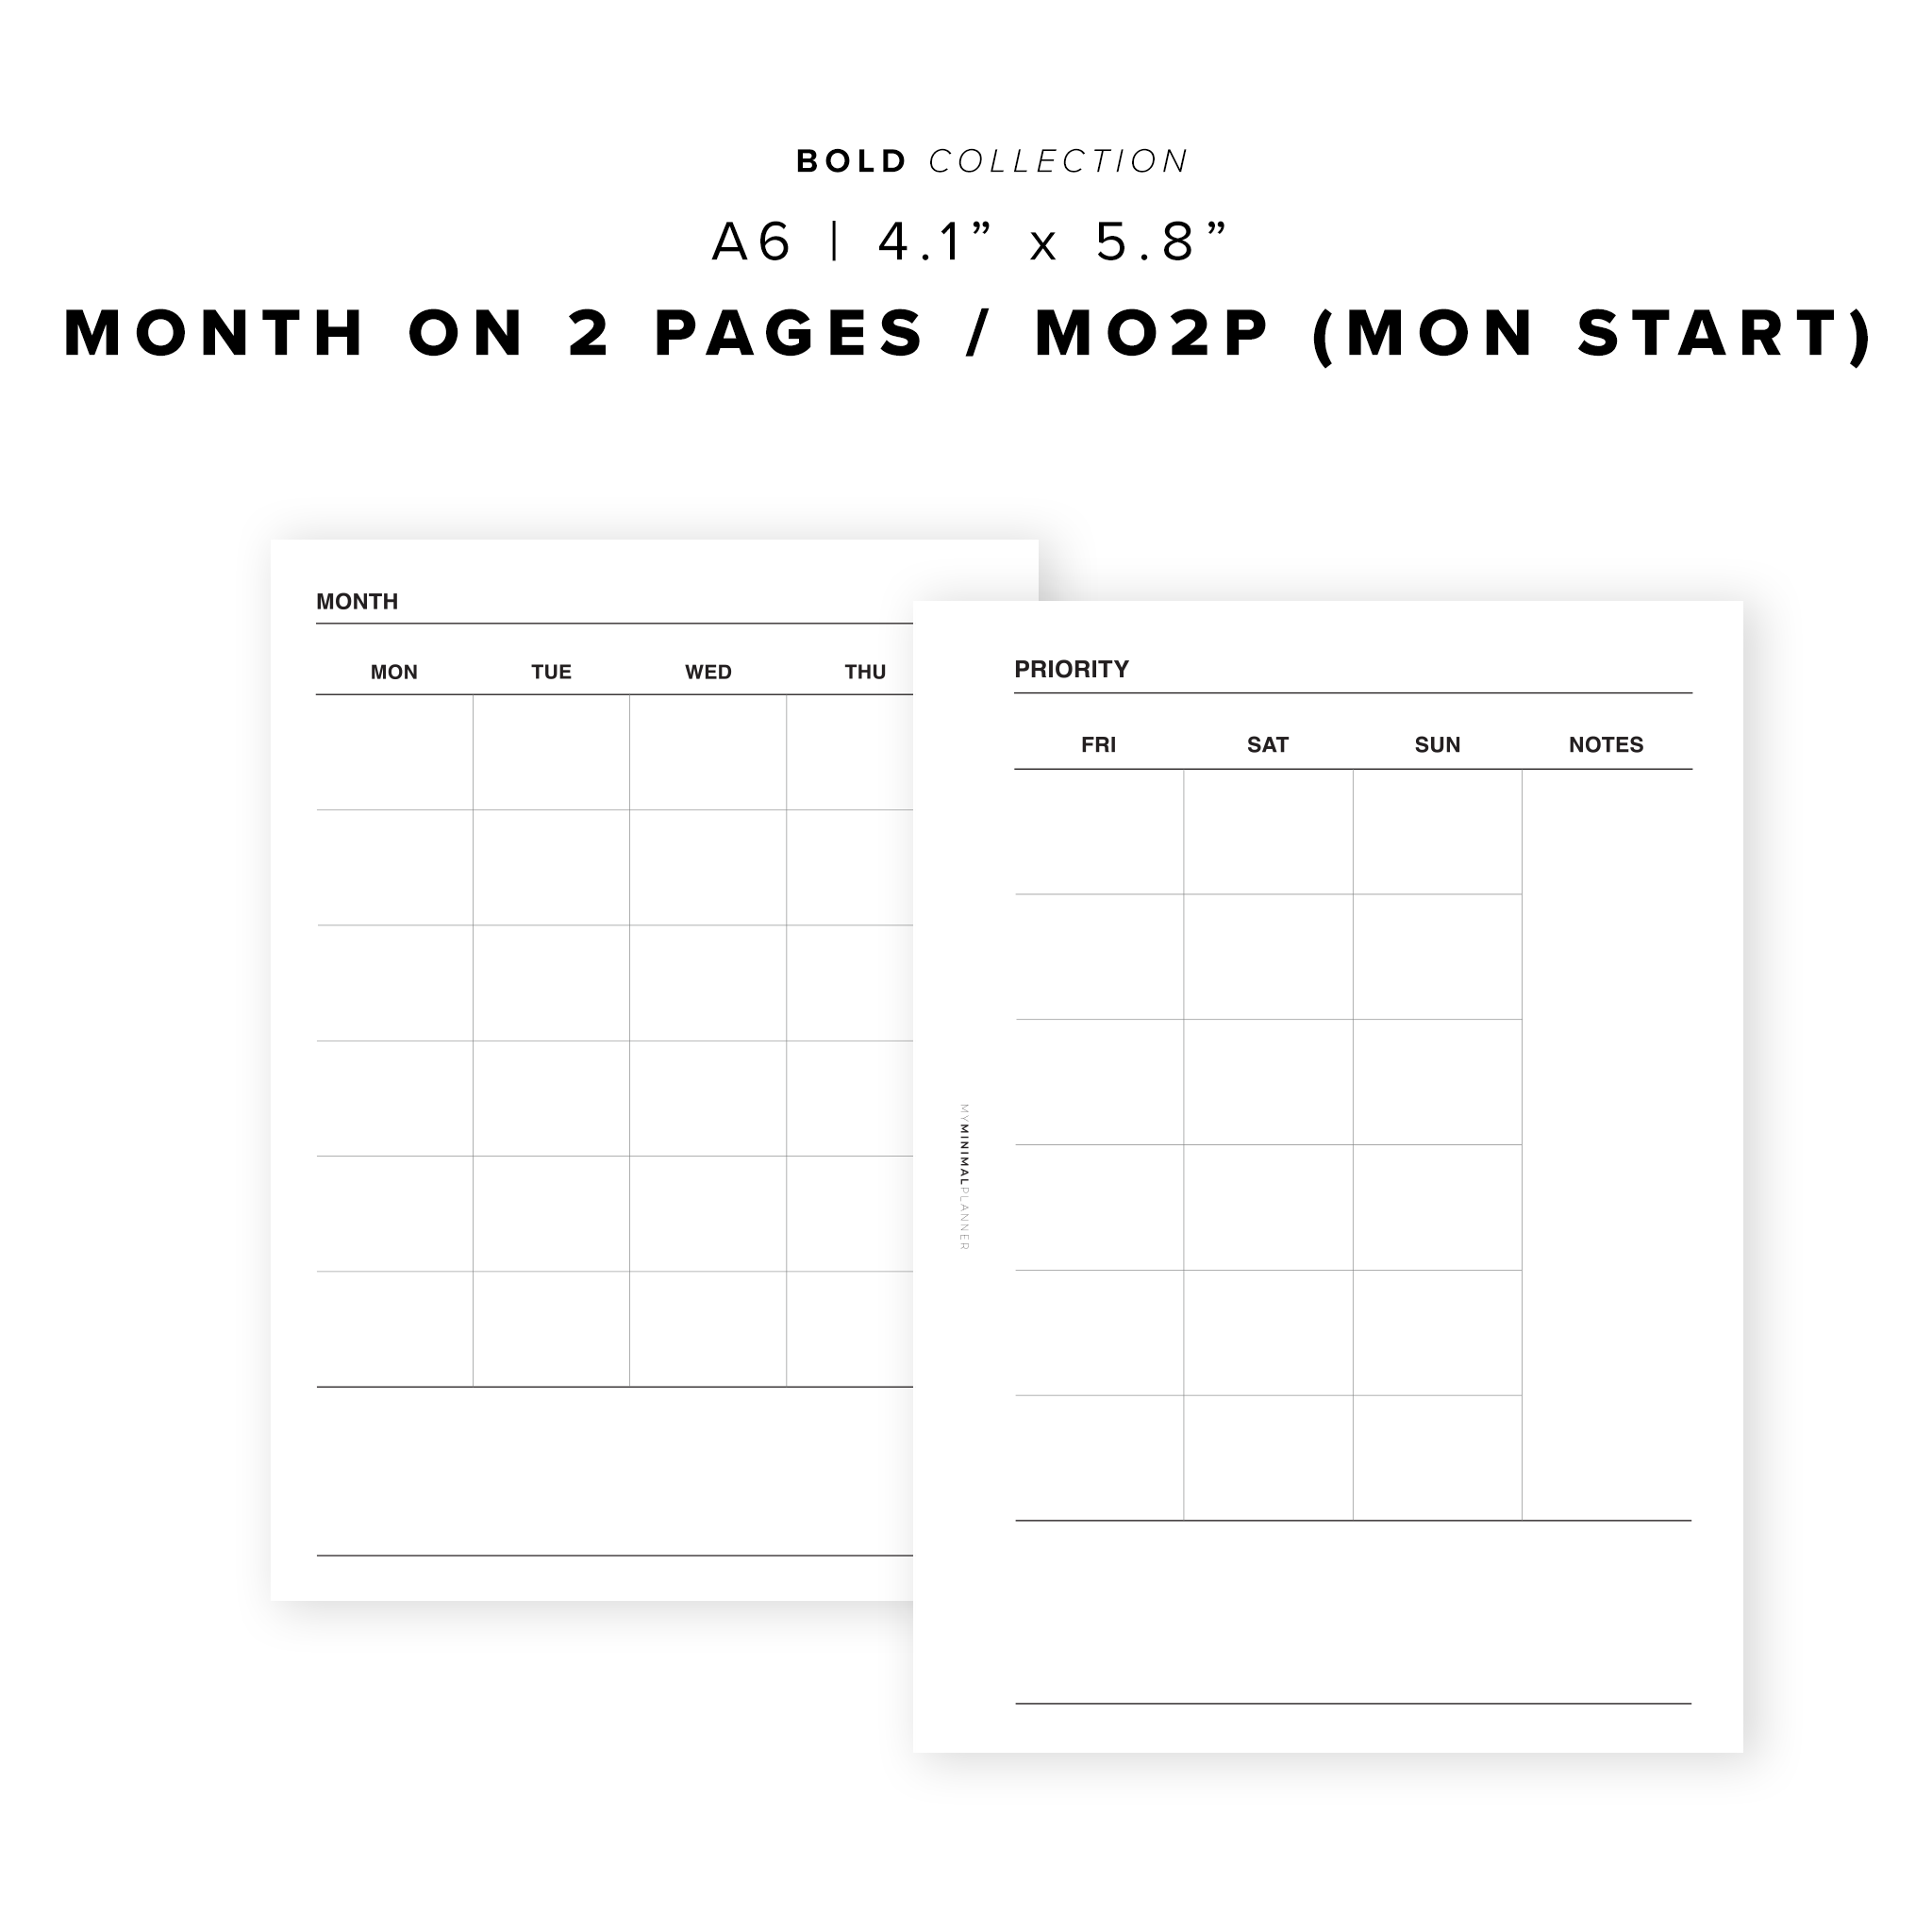 PR106 - Month on 2 Pages / MO2P - Printable Insert